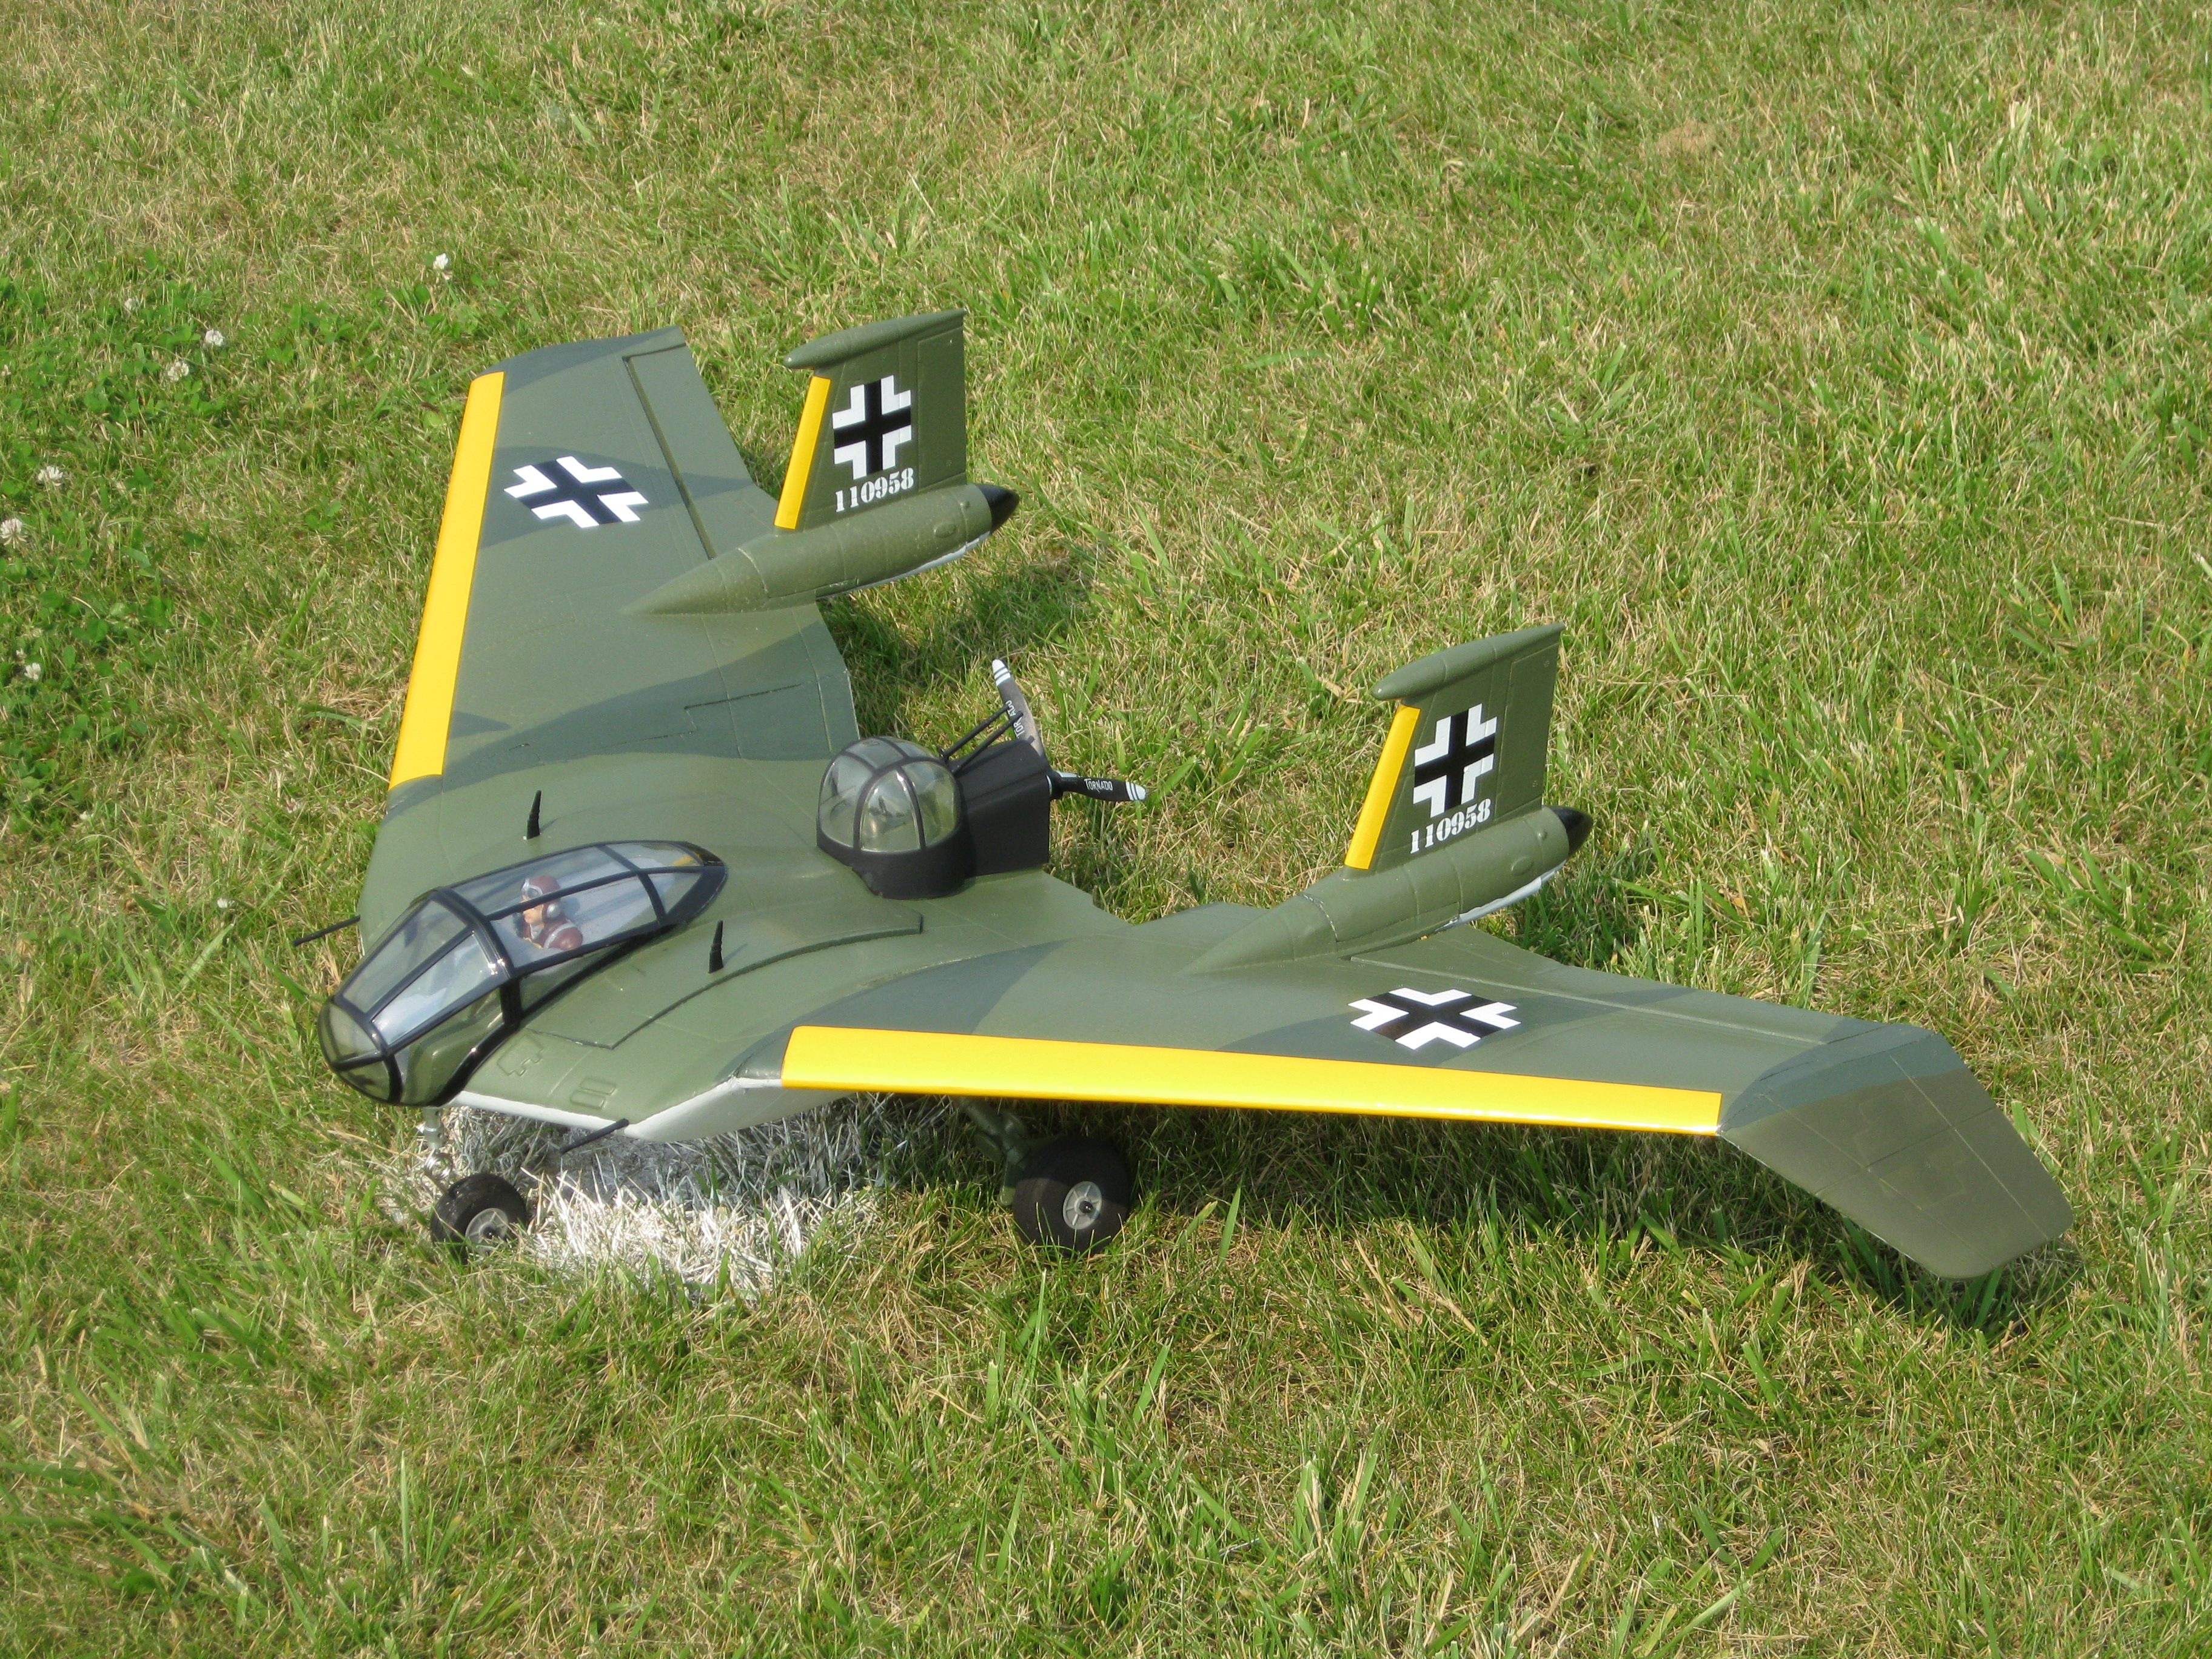 Raiders Of the Lost Ark Flying Wing - Flyable? - RCU Forums